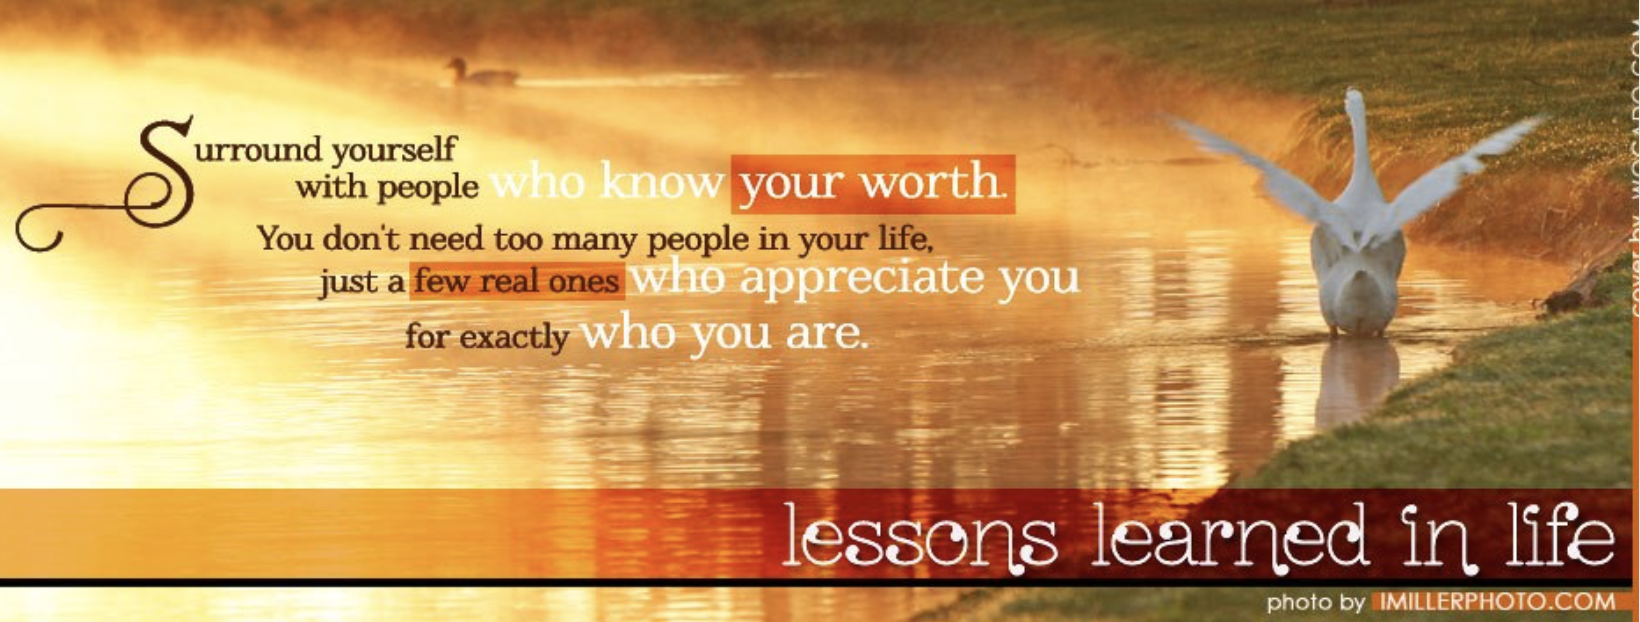 Lessons Learned In Life Facebook Page Image